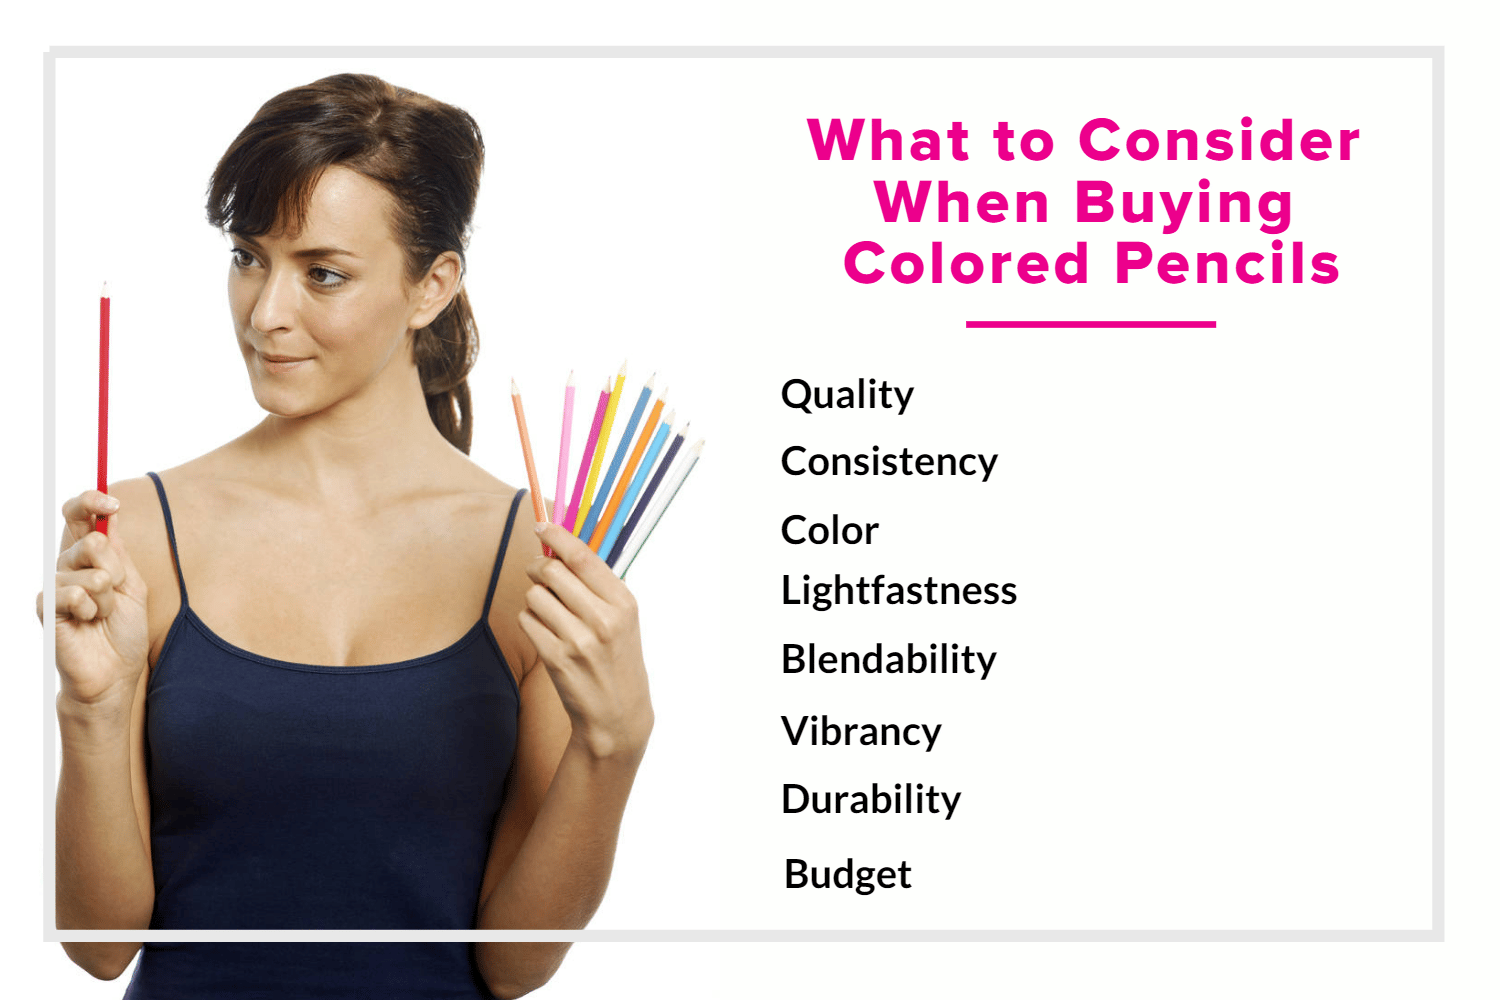 What to Consider When Buying Colored Pencils